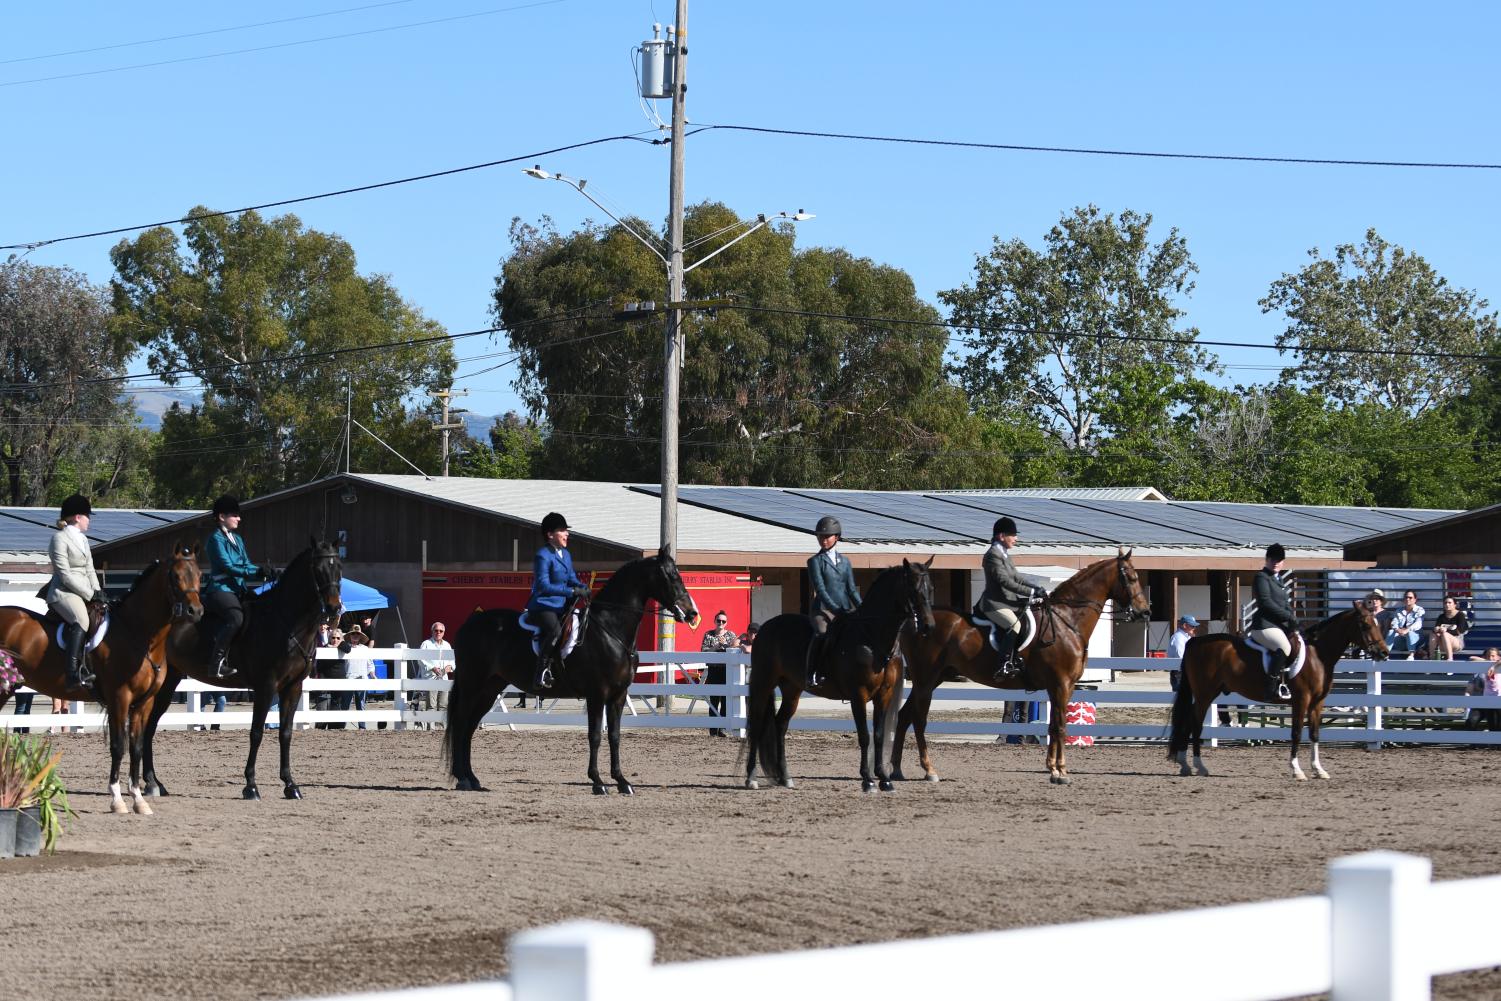 The+annual+Silicon+Valley+horse+show+is+held+successfully+at+alameda+county+fair